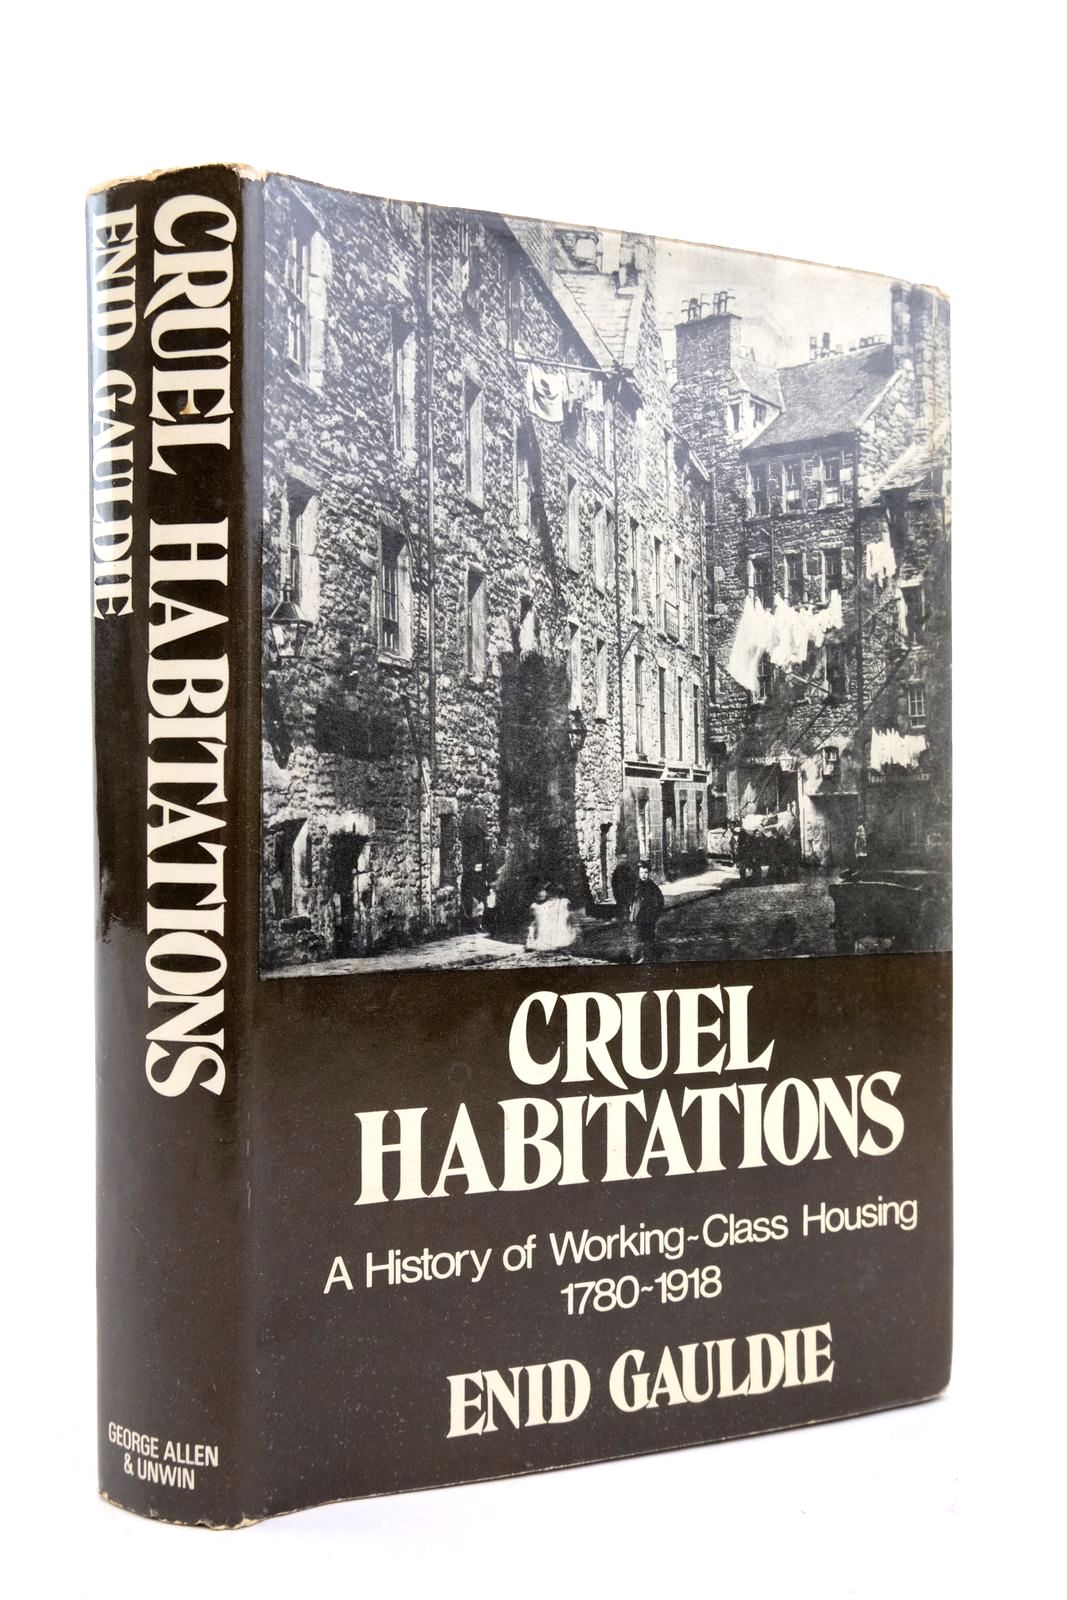 Photo of CRUEL HABITATIONS written by Gauldie, Enid published by George Allen &amp; Unwin Ltd. (STOCK CODE: 2135958)  for sale by Stella & Rose's Books